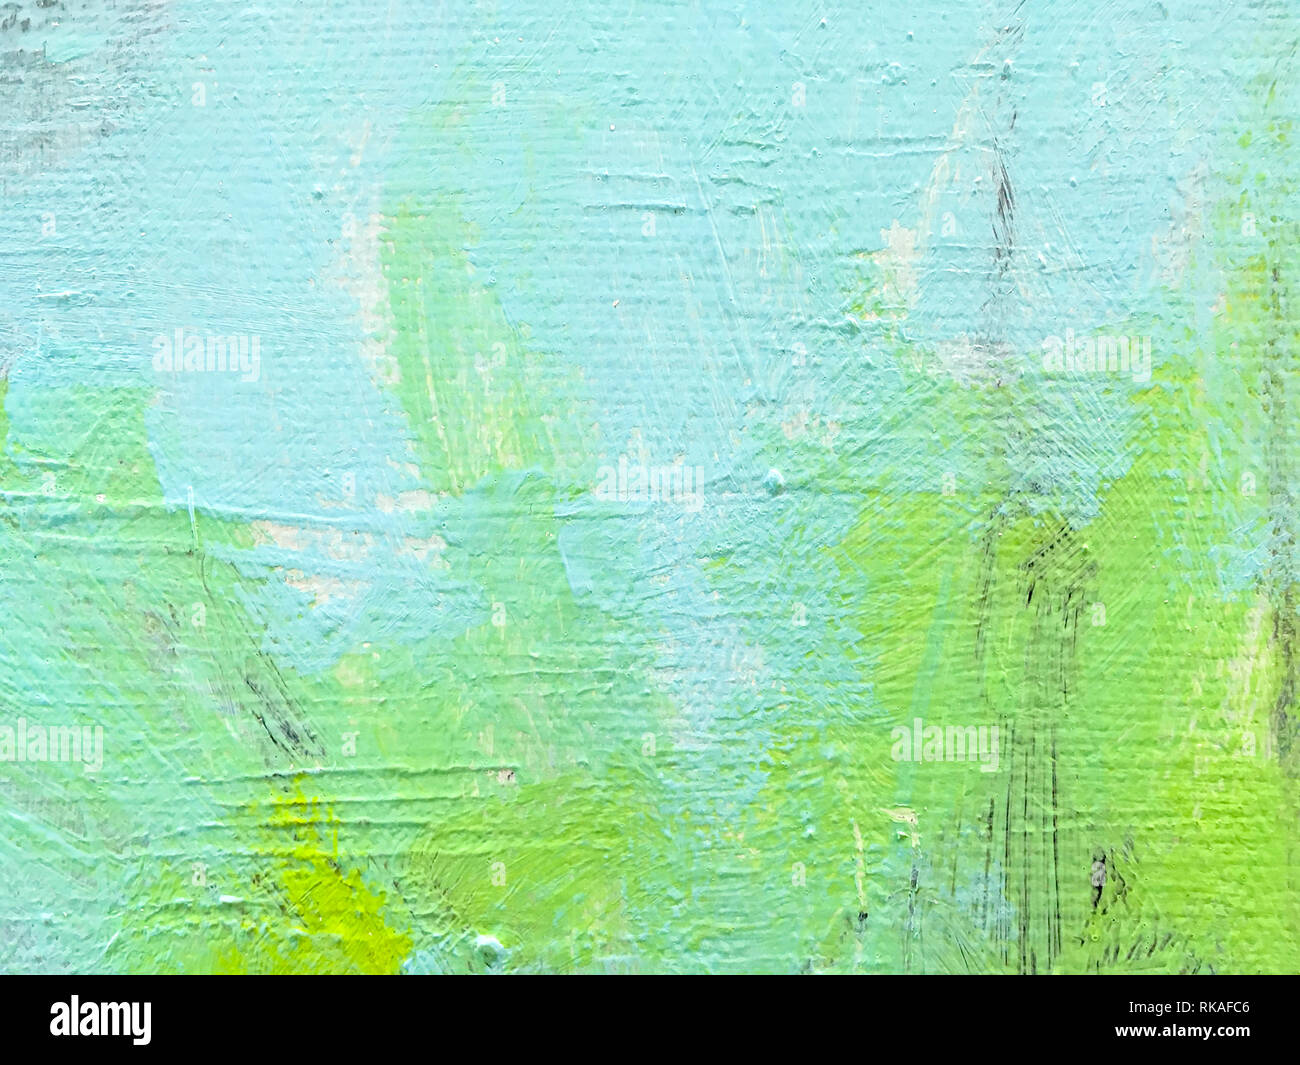 artistic background. hand painted canvas with blue and green colors Stock Photo